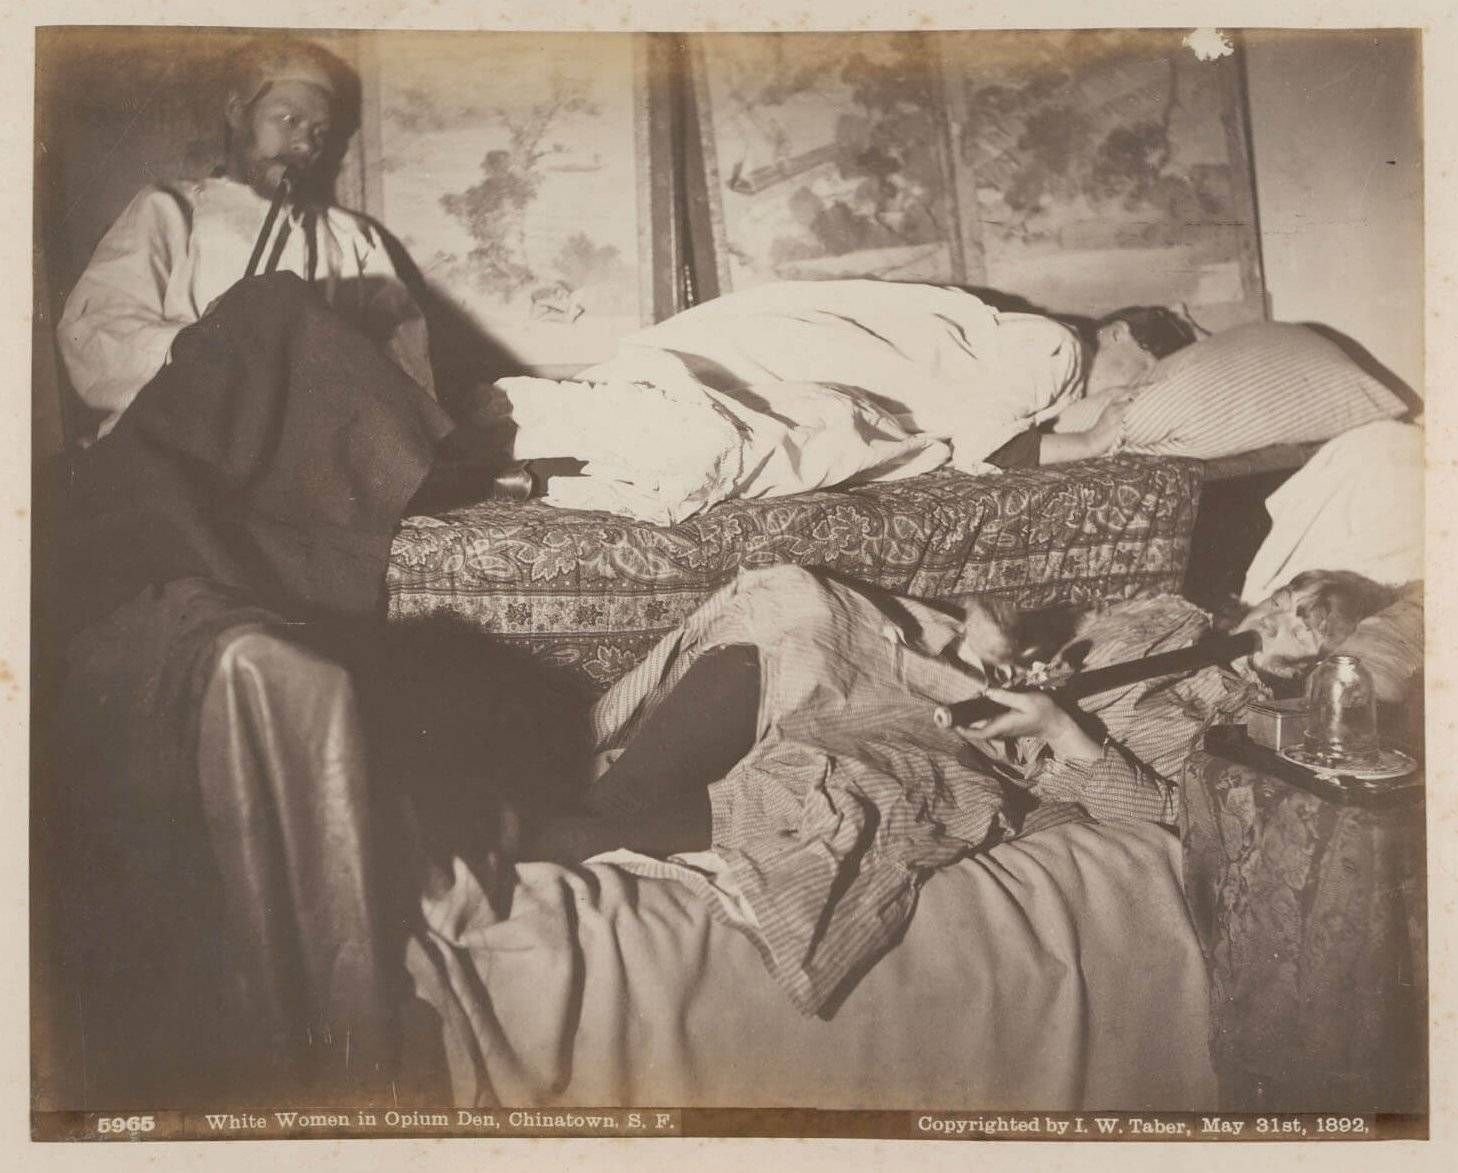 San Francisco opium dens in the mid-1800s. Photo courtesy of UC Berkeley, Bancroft Library.